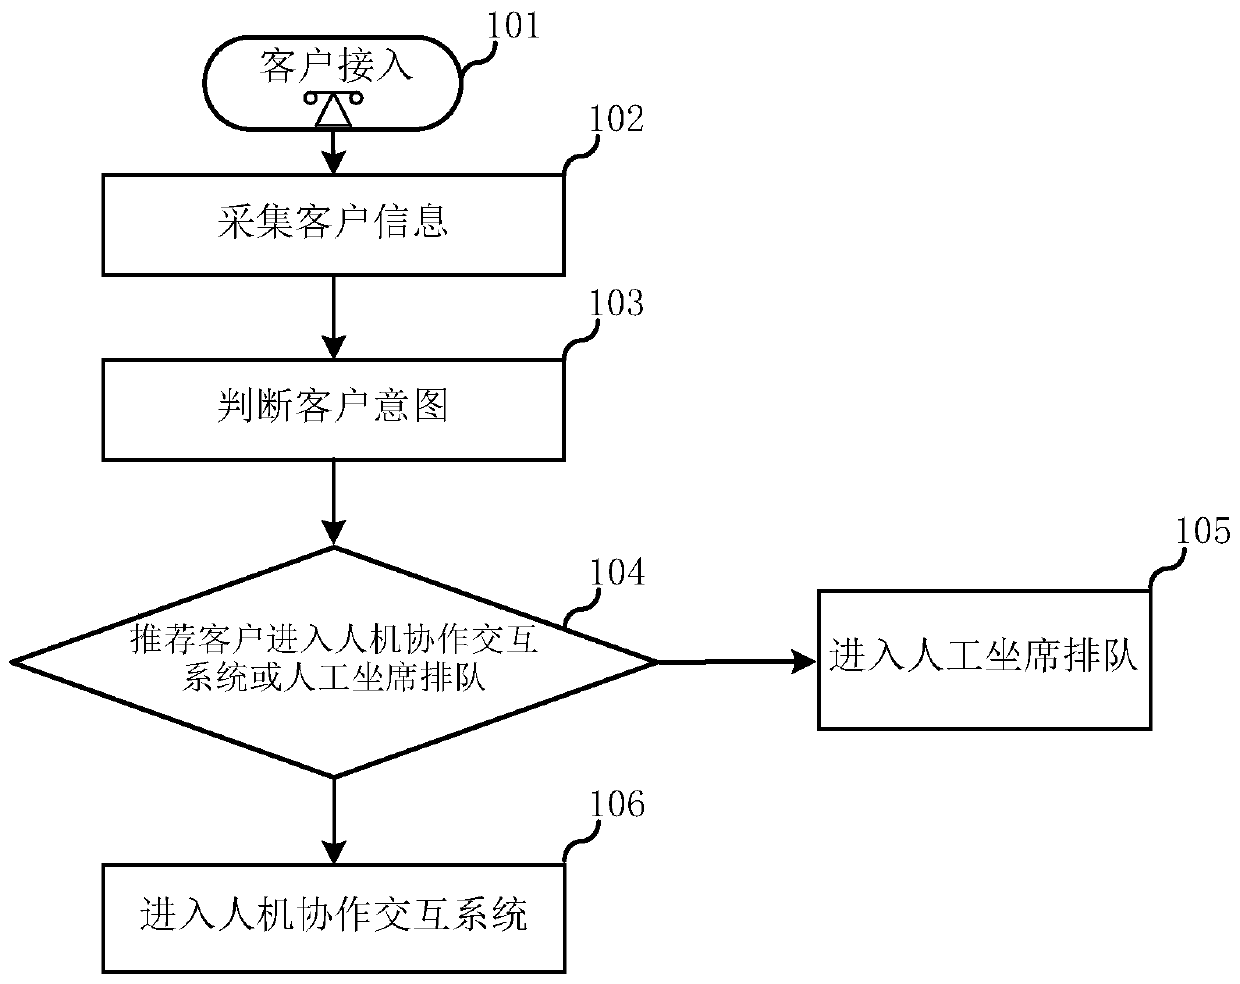 Man-machine cooperation interaction method and system